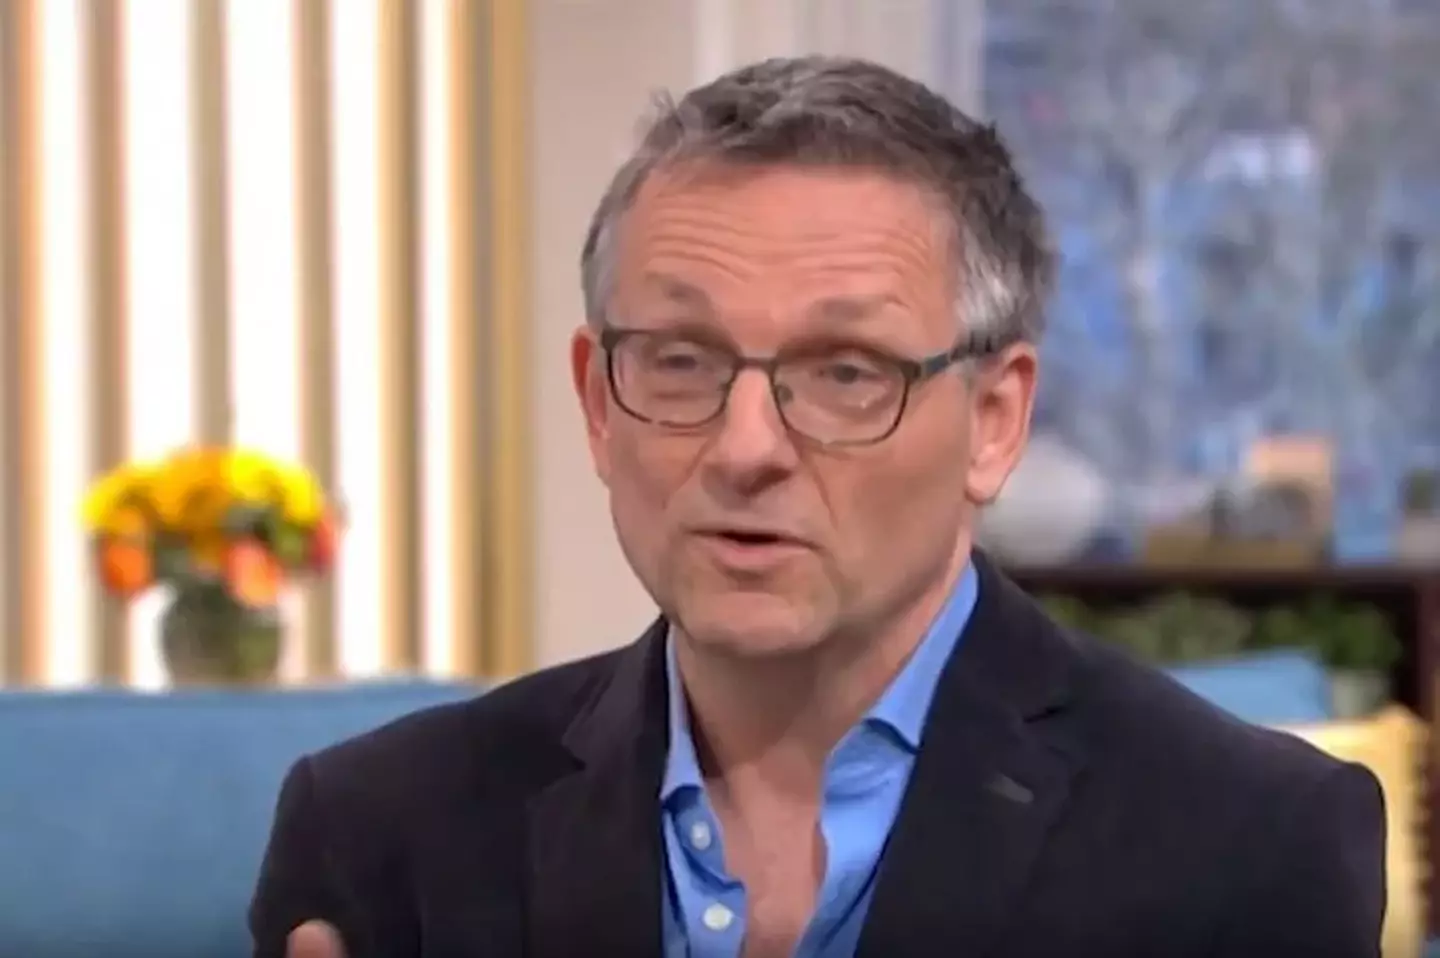 Don't be a phubbing idiot, says Michael Mosley, it'll make you less happy in your life.